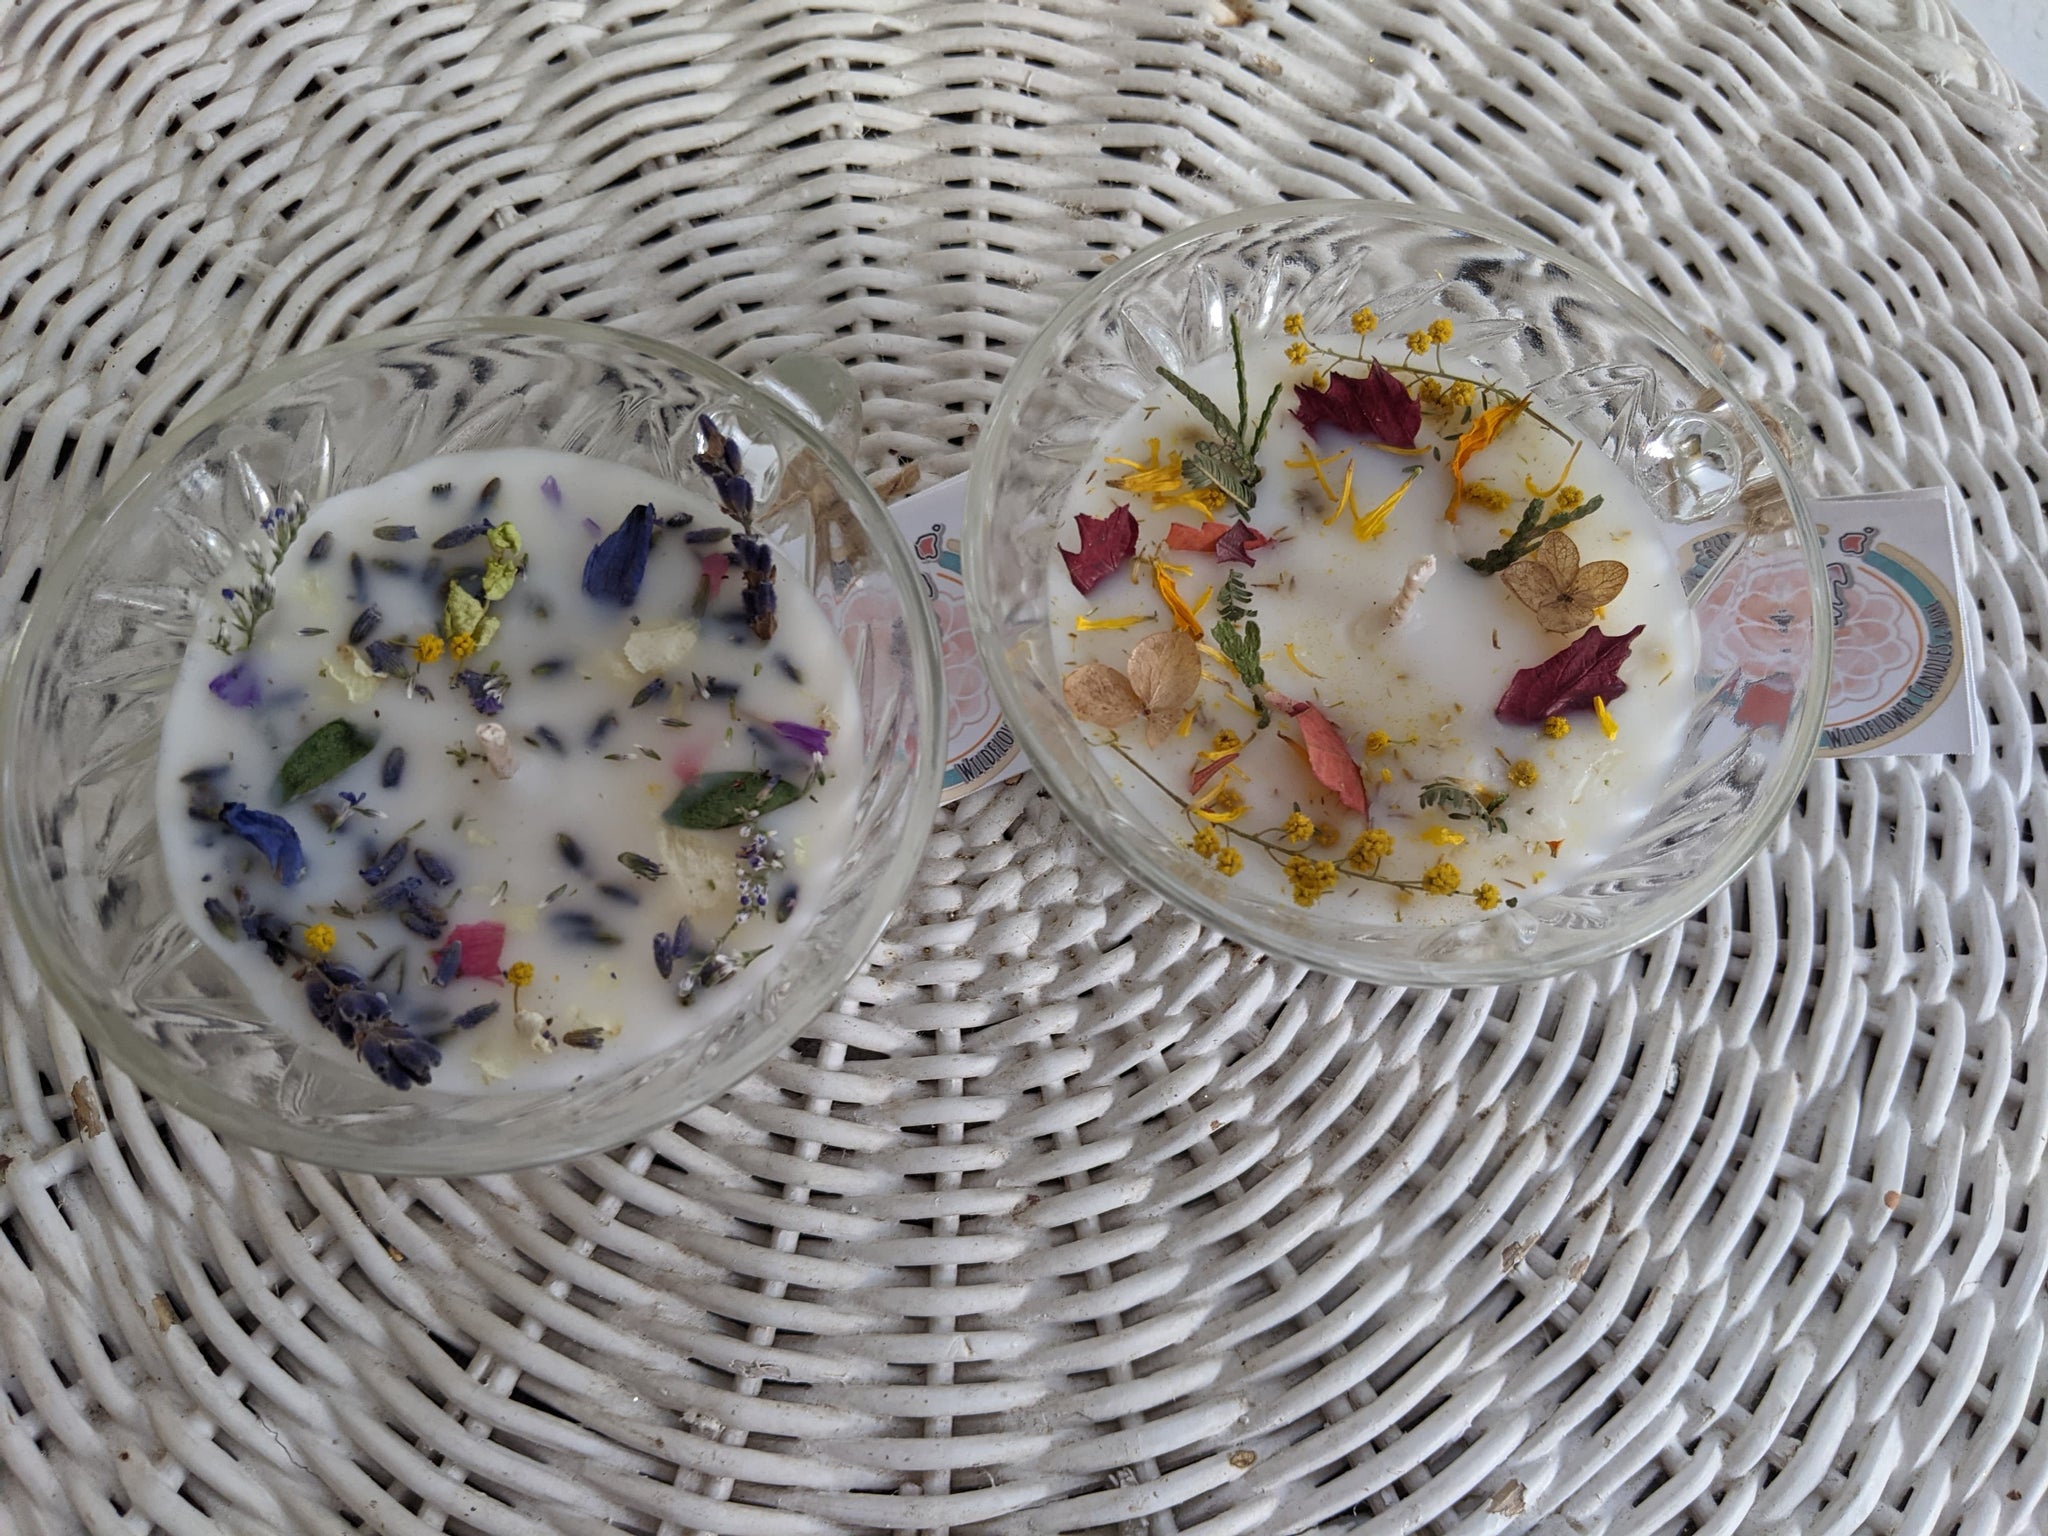 Small - Size "Standard" Teacup Candles - Top View (Example Only)